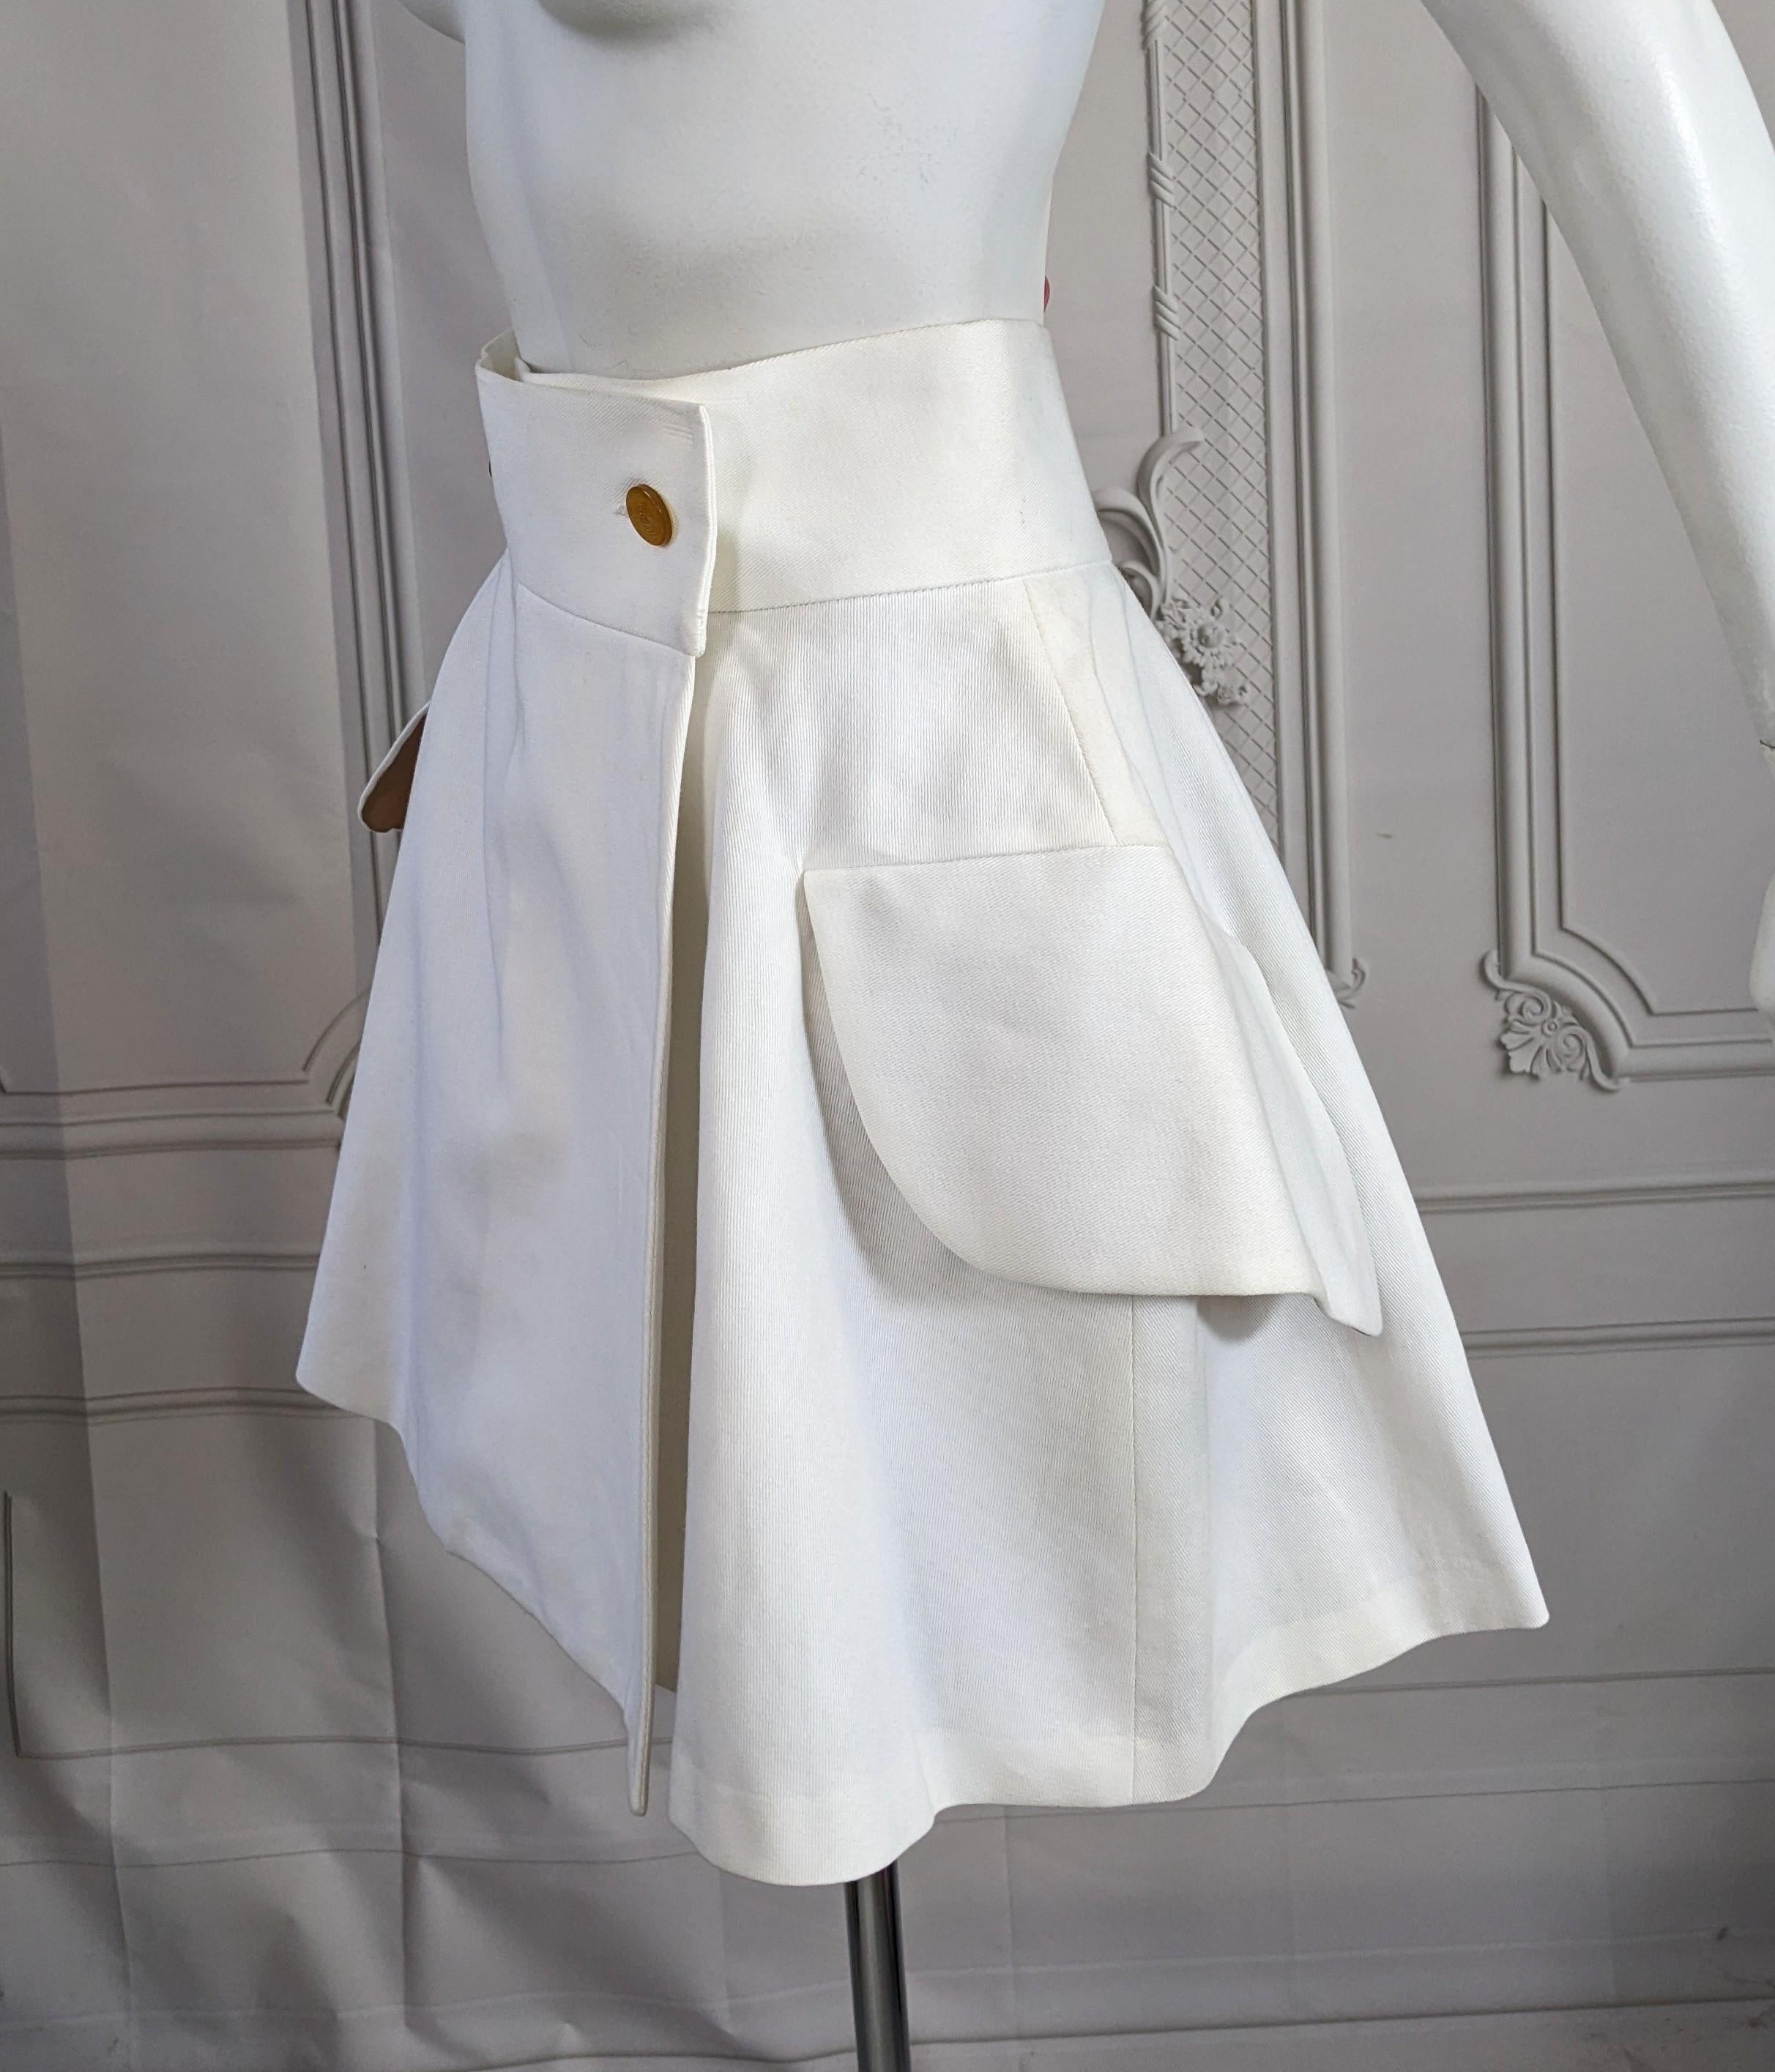 Vivienne Westwood Iconic White Twill Mini Skirt In Good Condition For Sale In New York, NY